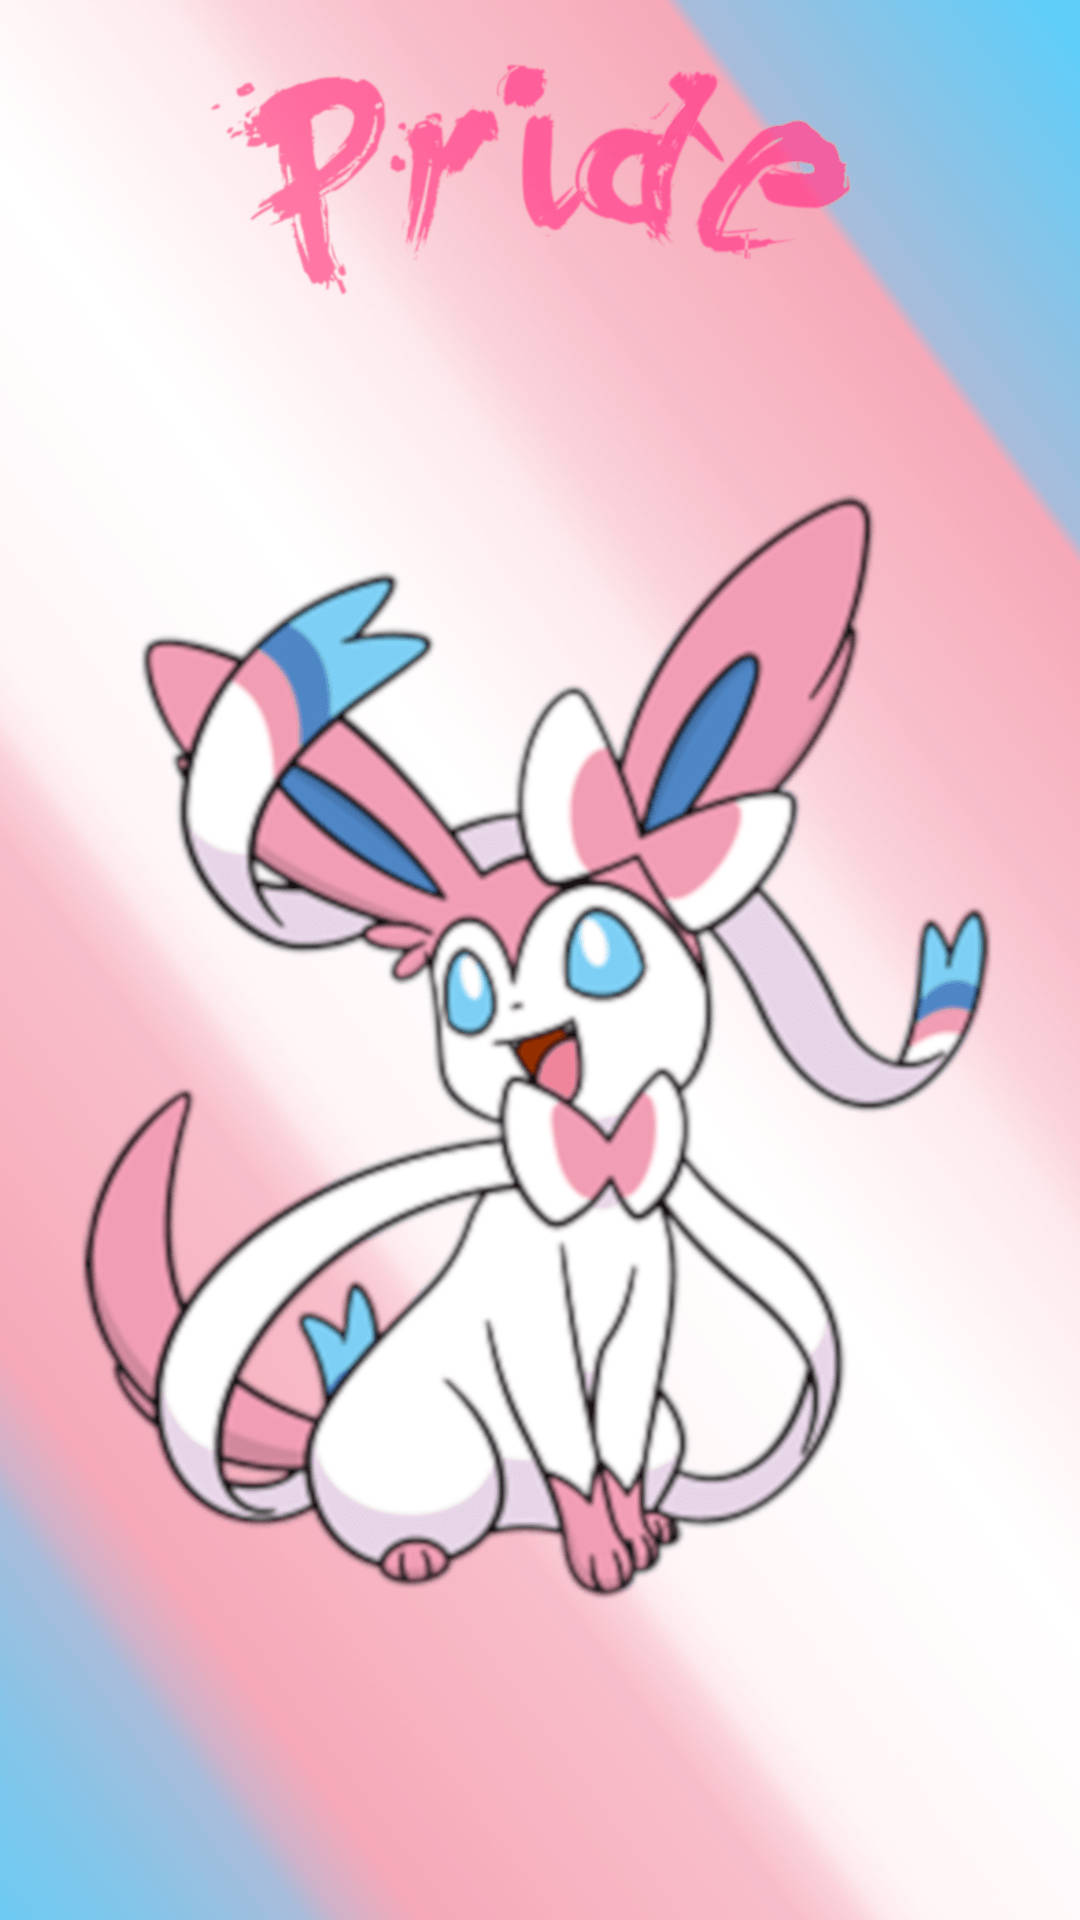 Show Your Pride For Sylveon By Decorating Your Phone With Its Beautiful Colors. Background